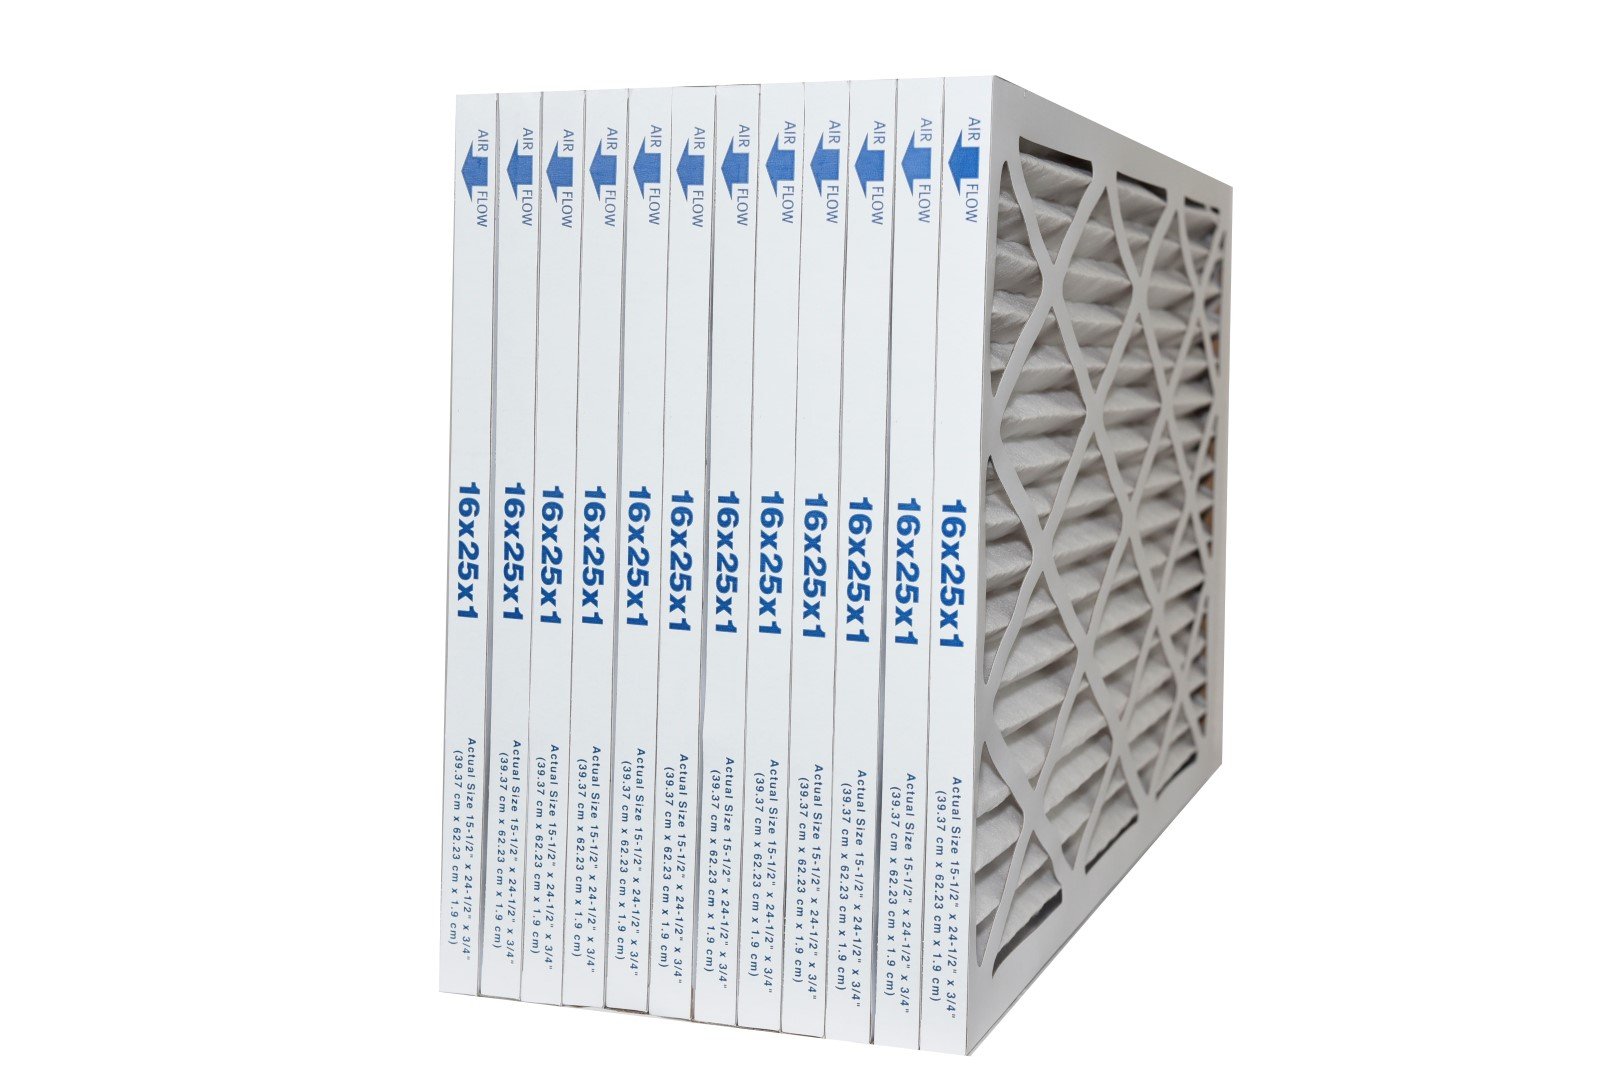 16x25x1 MERV 8 Furnace & A/C Air Filter, Pleated Material. Case of 12 Made in Canada by FurnaceFilters.Ca